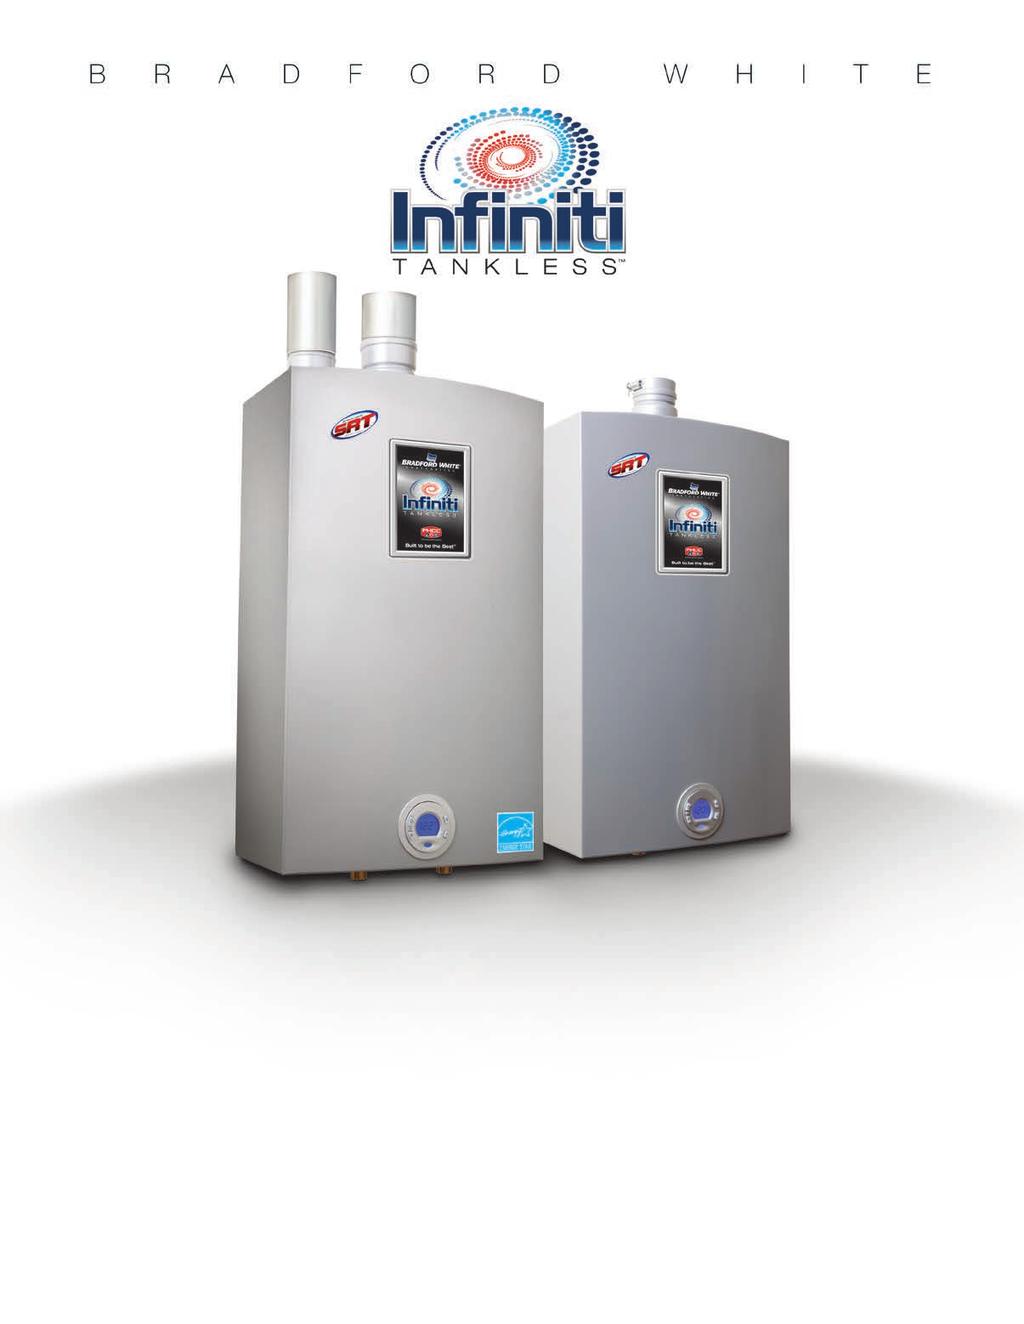 Infi niti Tankless Water Heater Series Featuring SRT (Scale